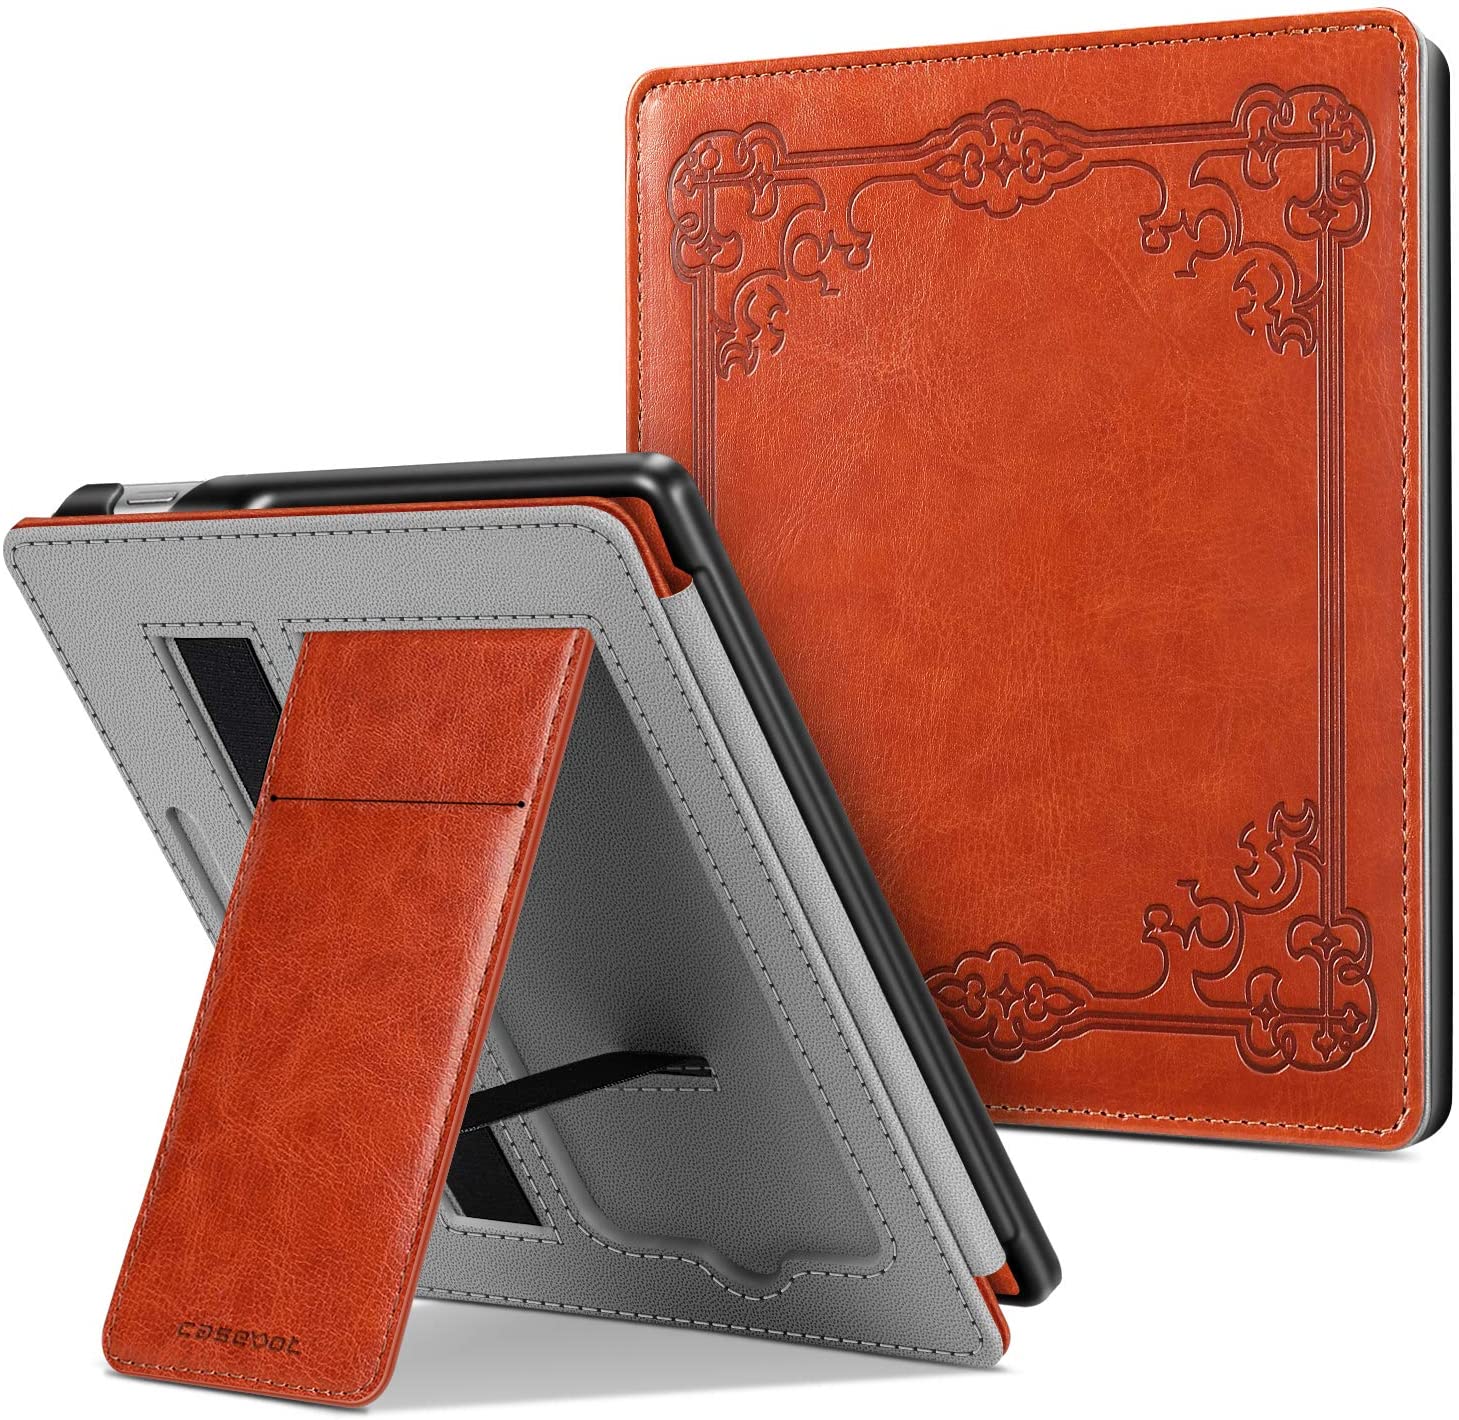 5. CaseBot Stand Case for All-New Kindle Oasis